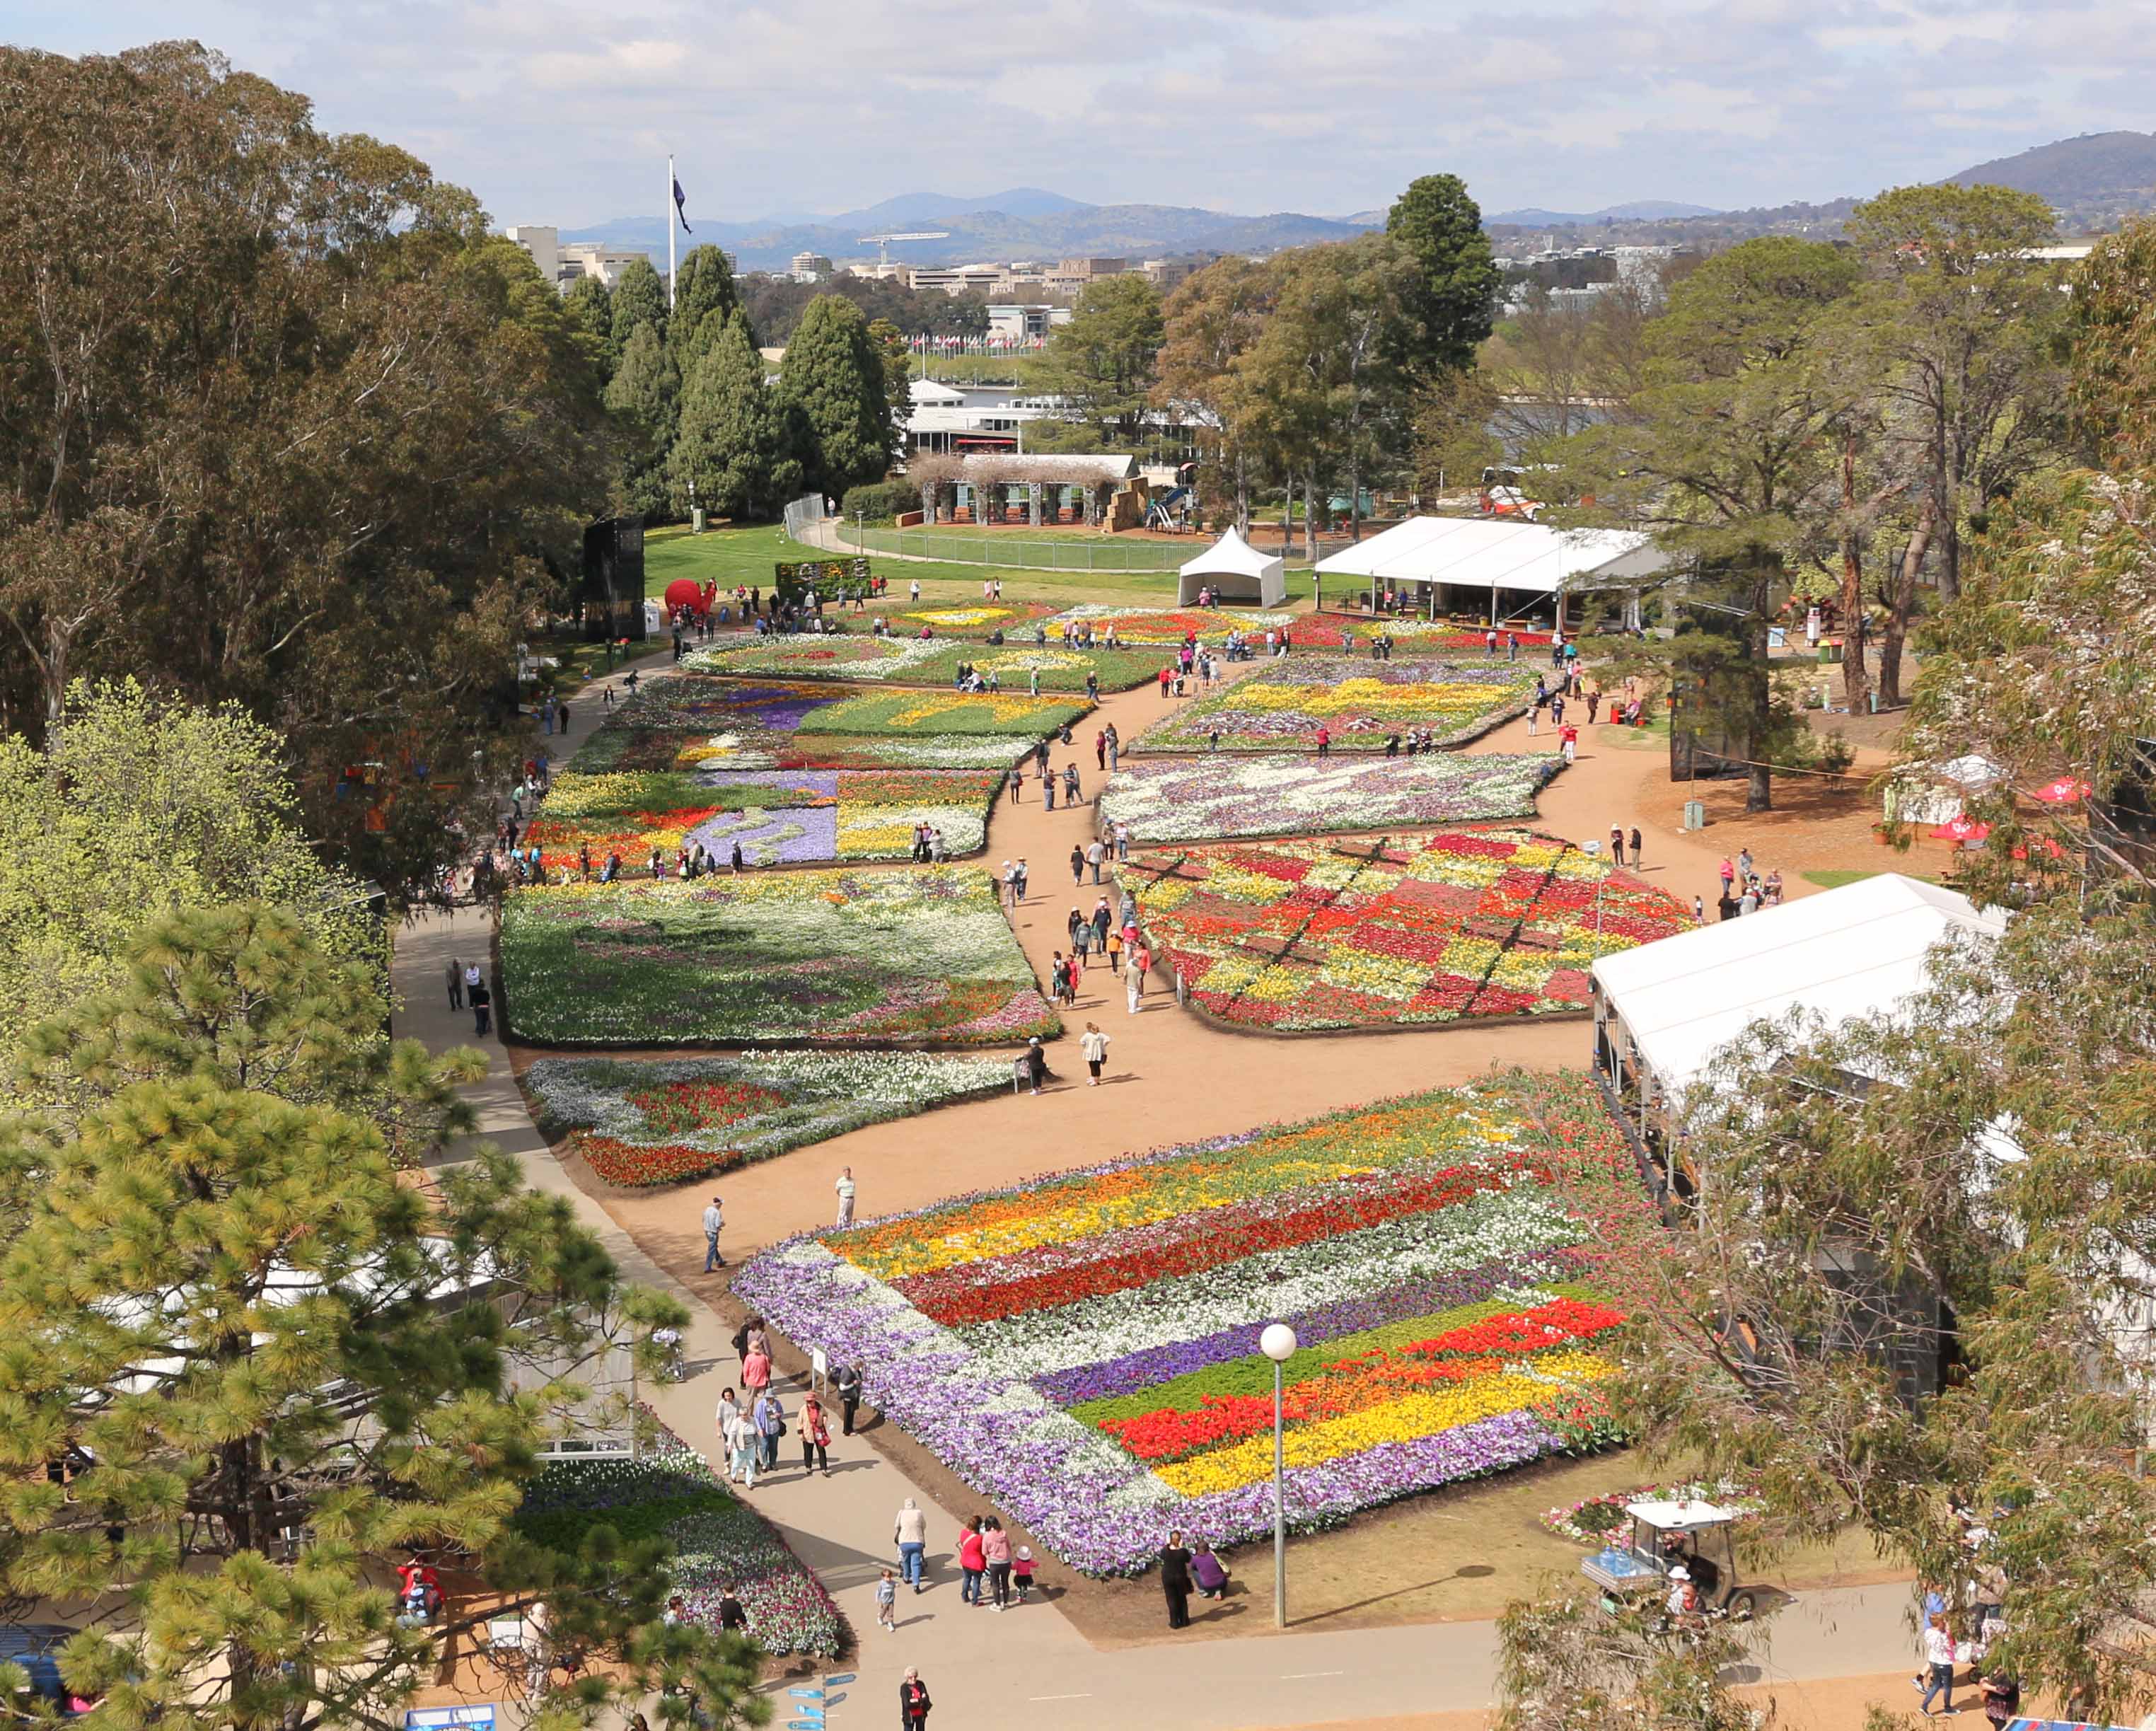 A View of Floriade from Above in the Ferris Wheel